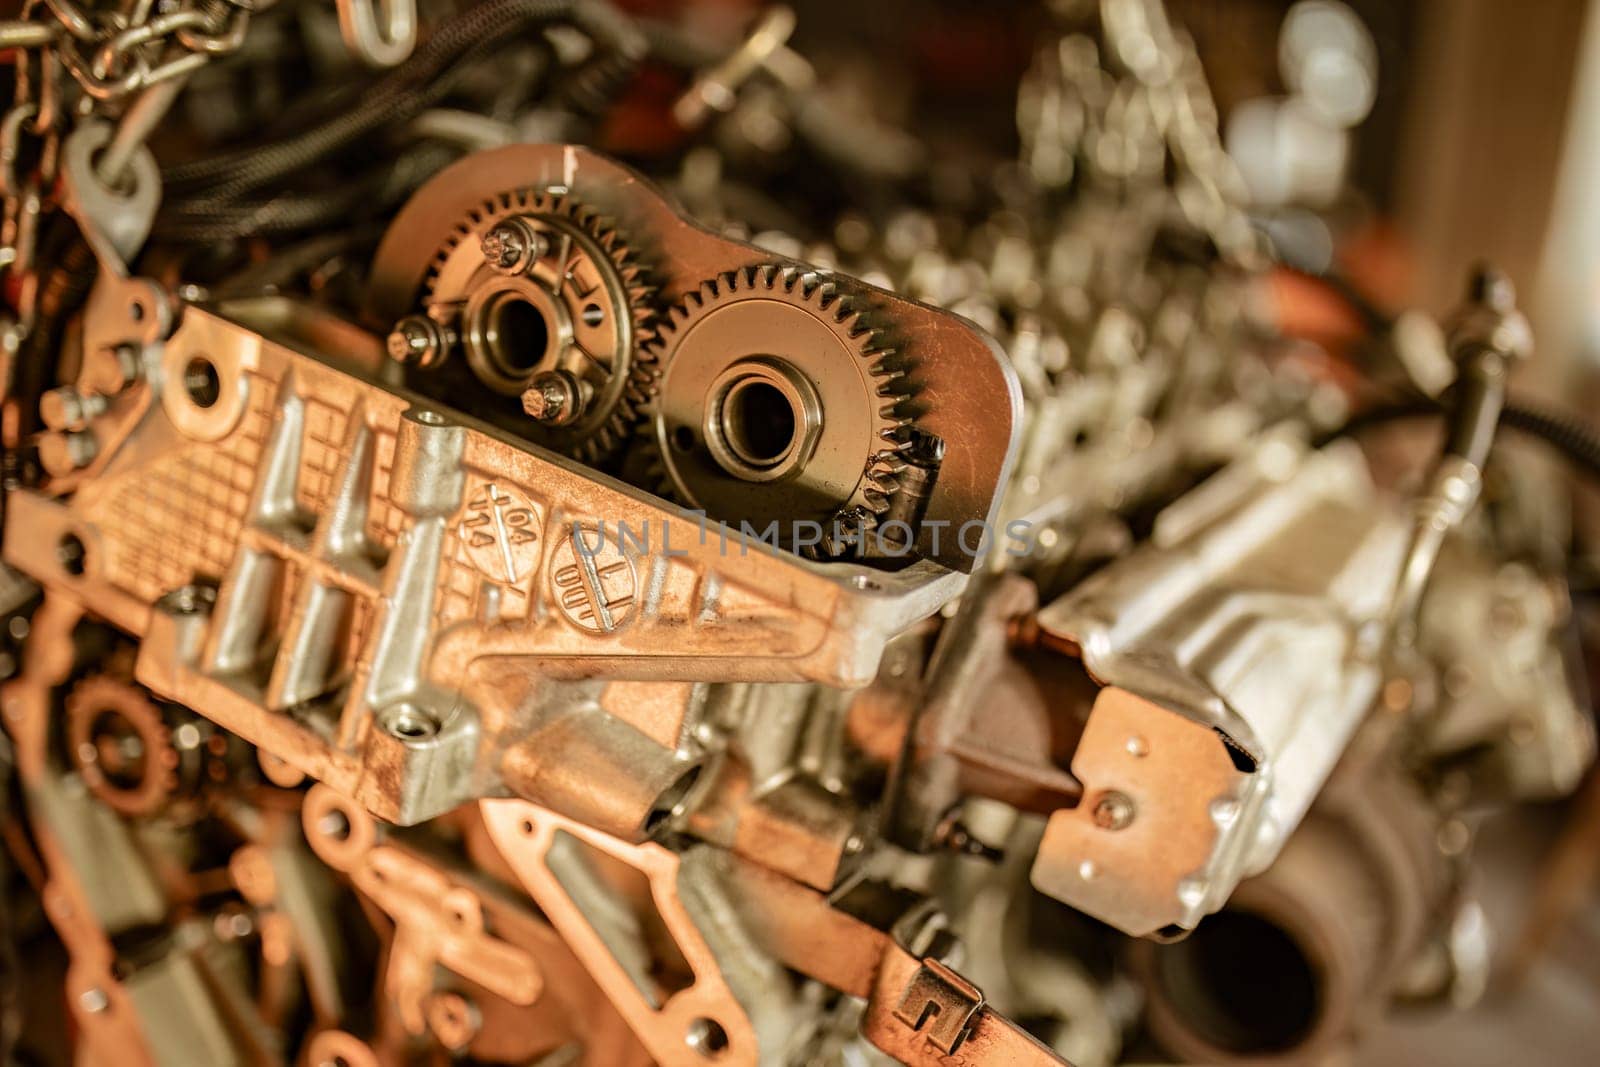 Mechanical Car Engine Parts by pippocarlot